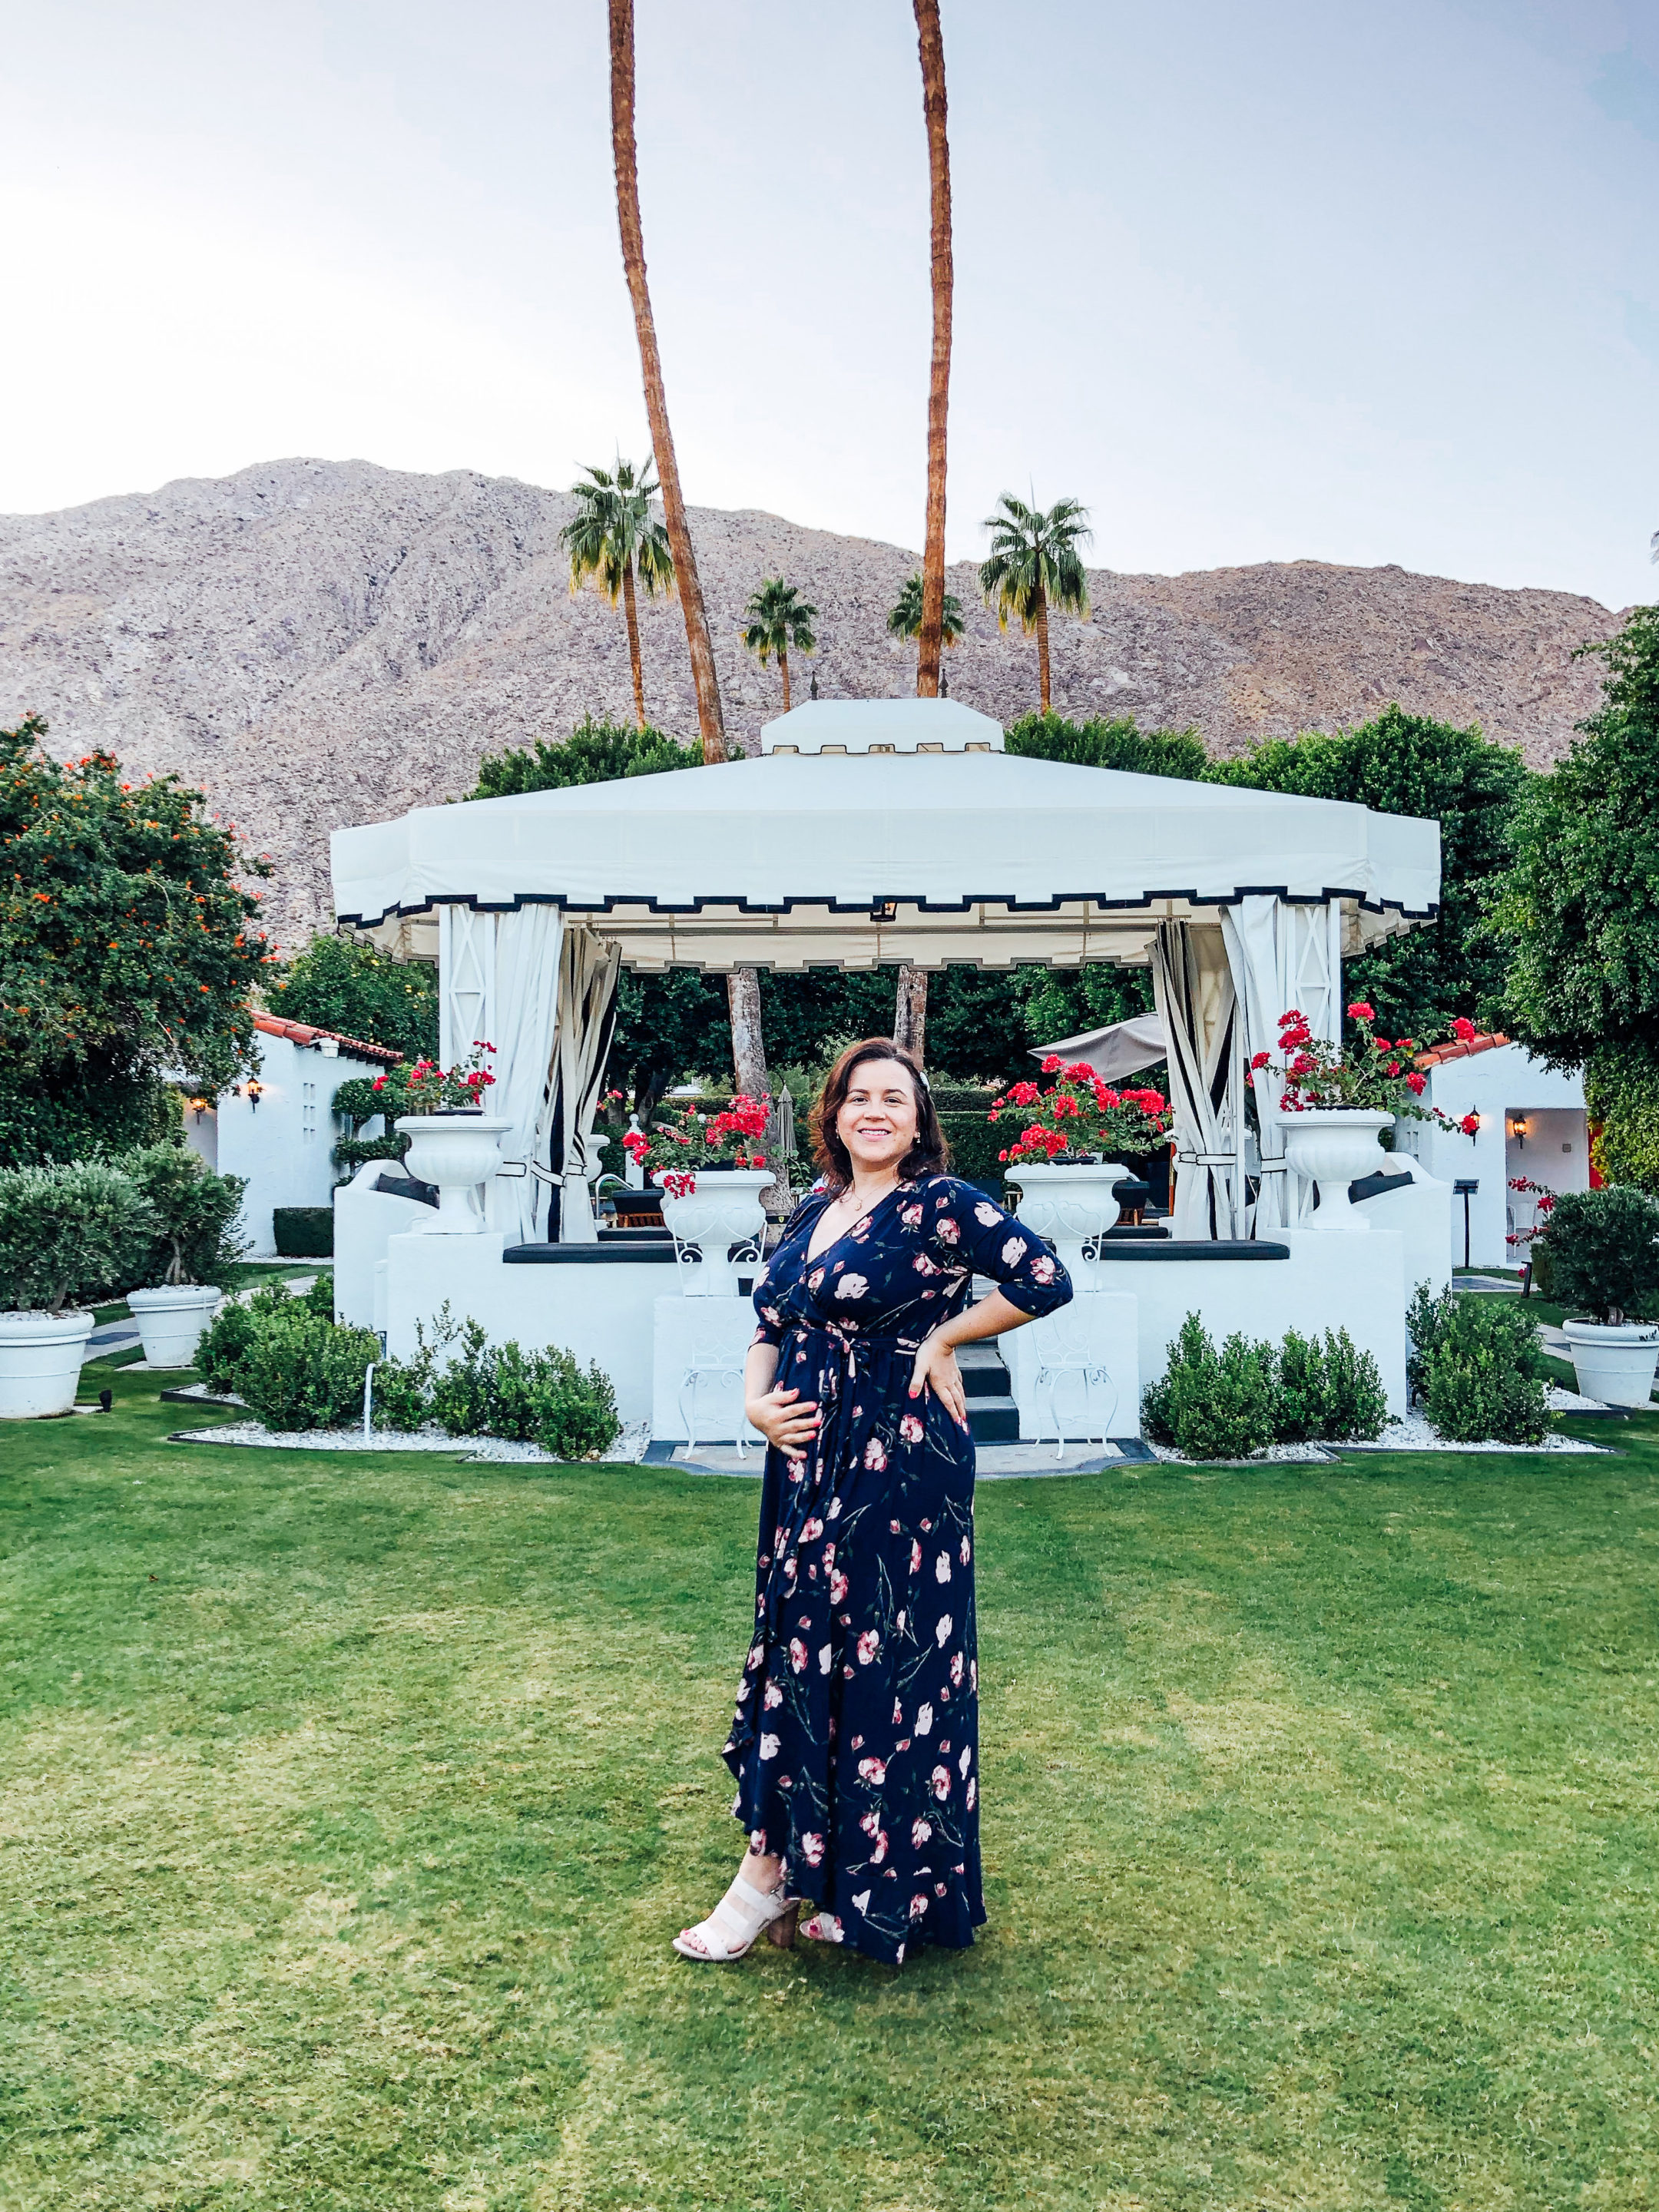 Our Palm Springs Babymoon